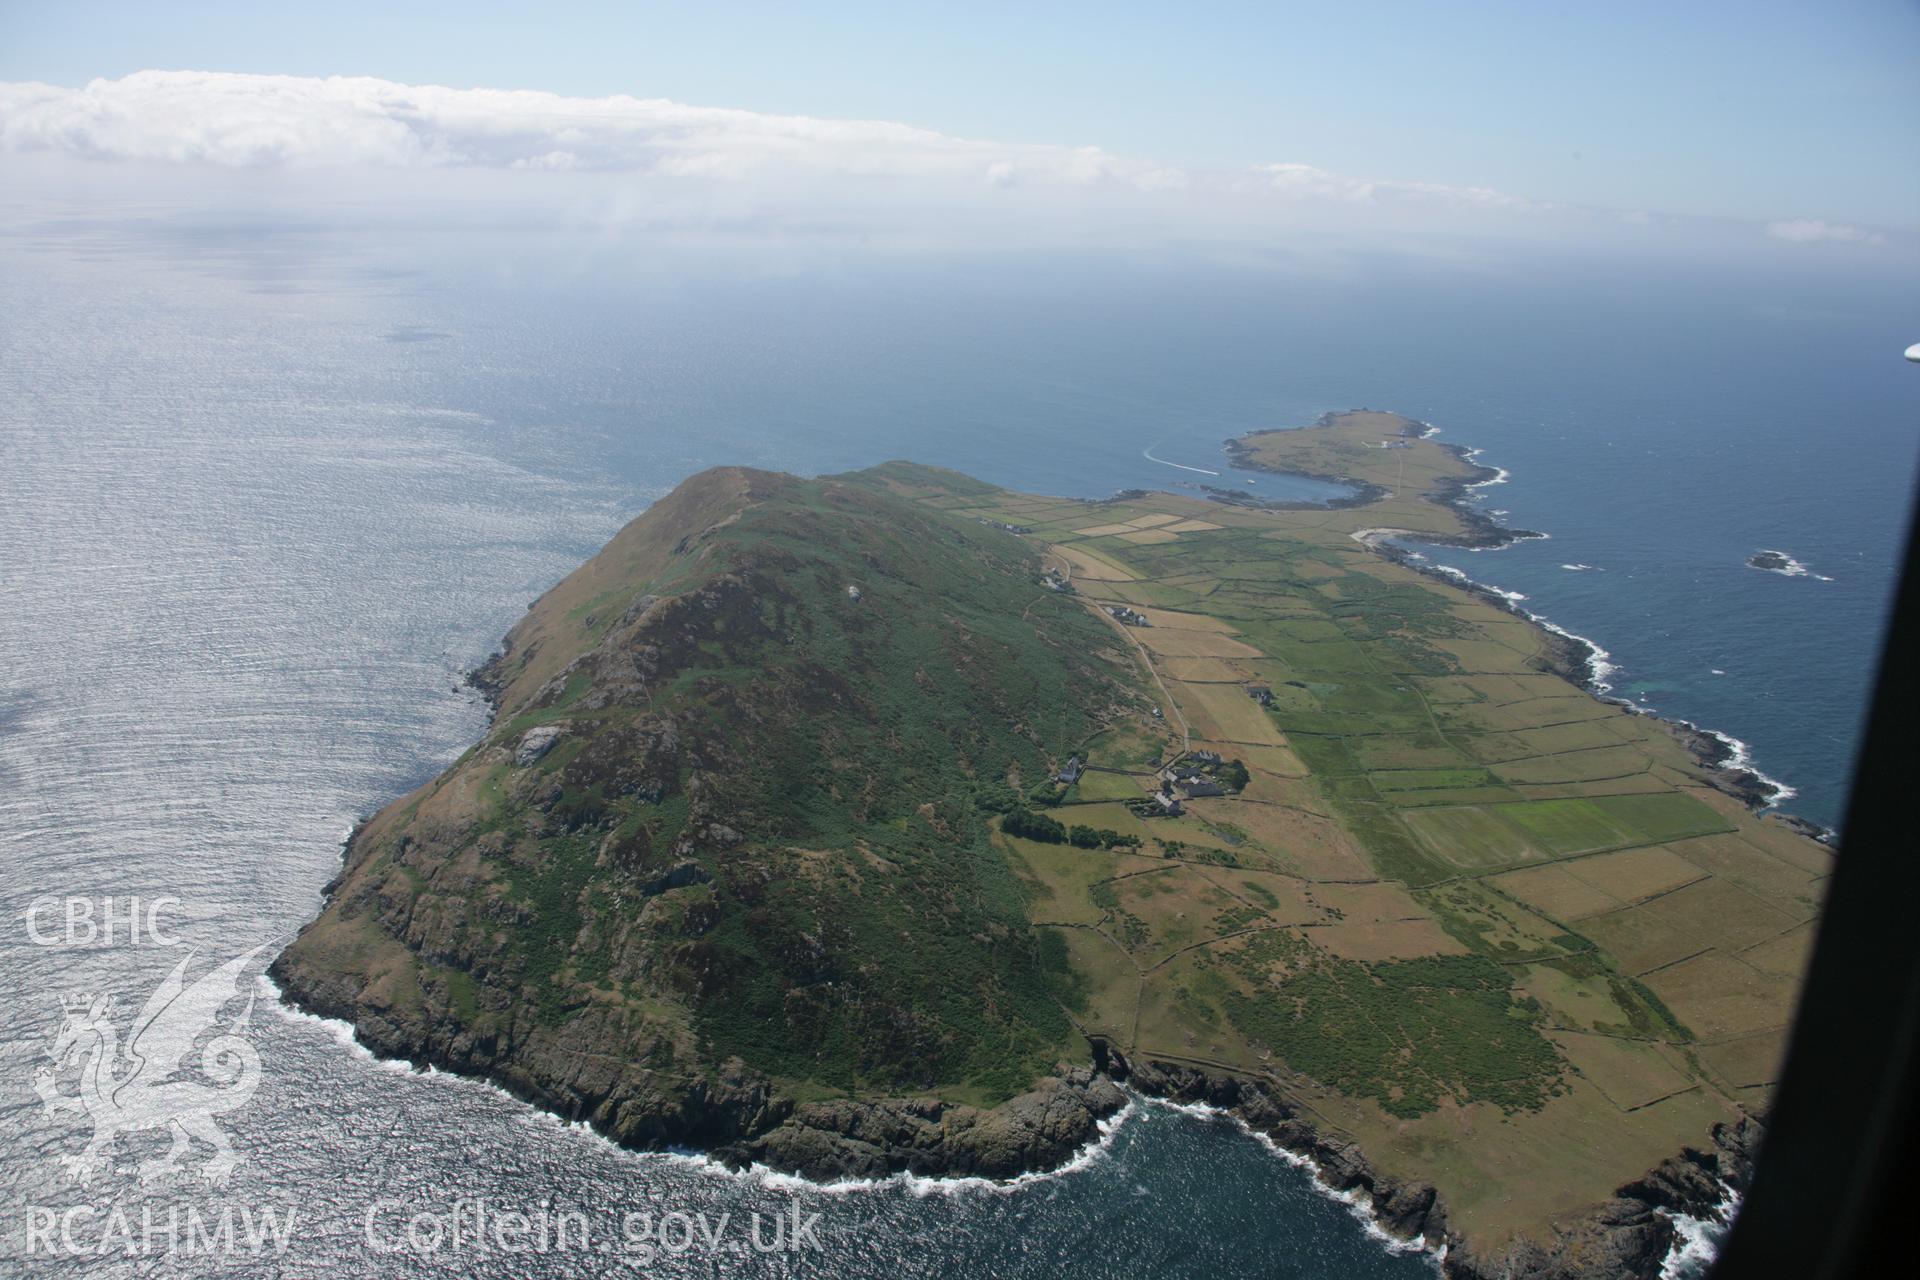 RCAHMW colour oblique aerial photograph of Bardsey Island (Ynys Enlli) from the north. Taken on 03 August 2006 by Toby Driver.